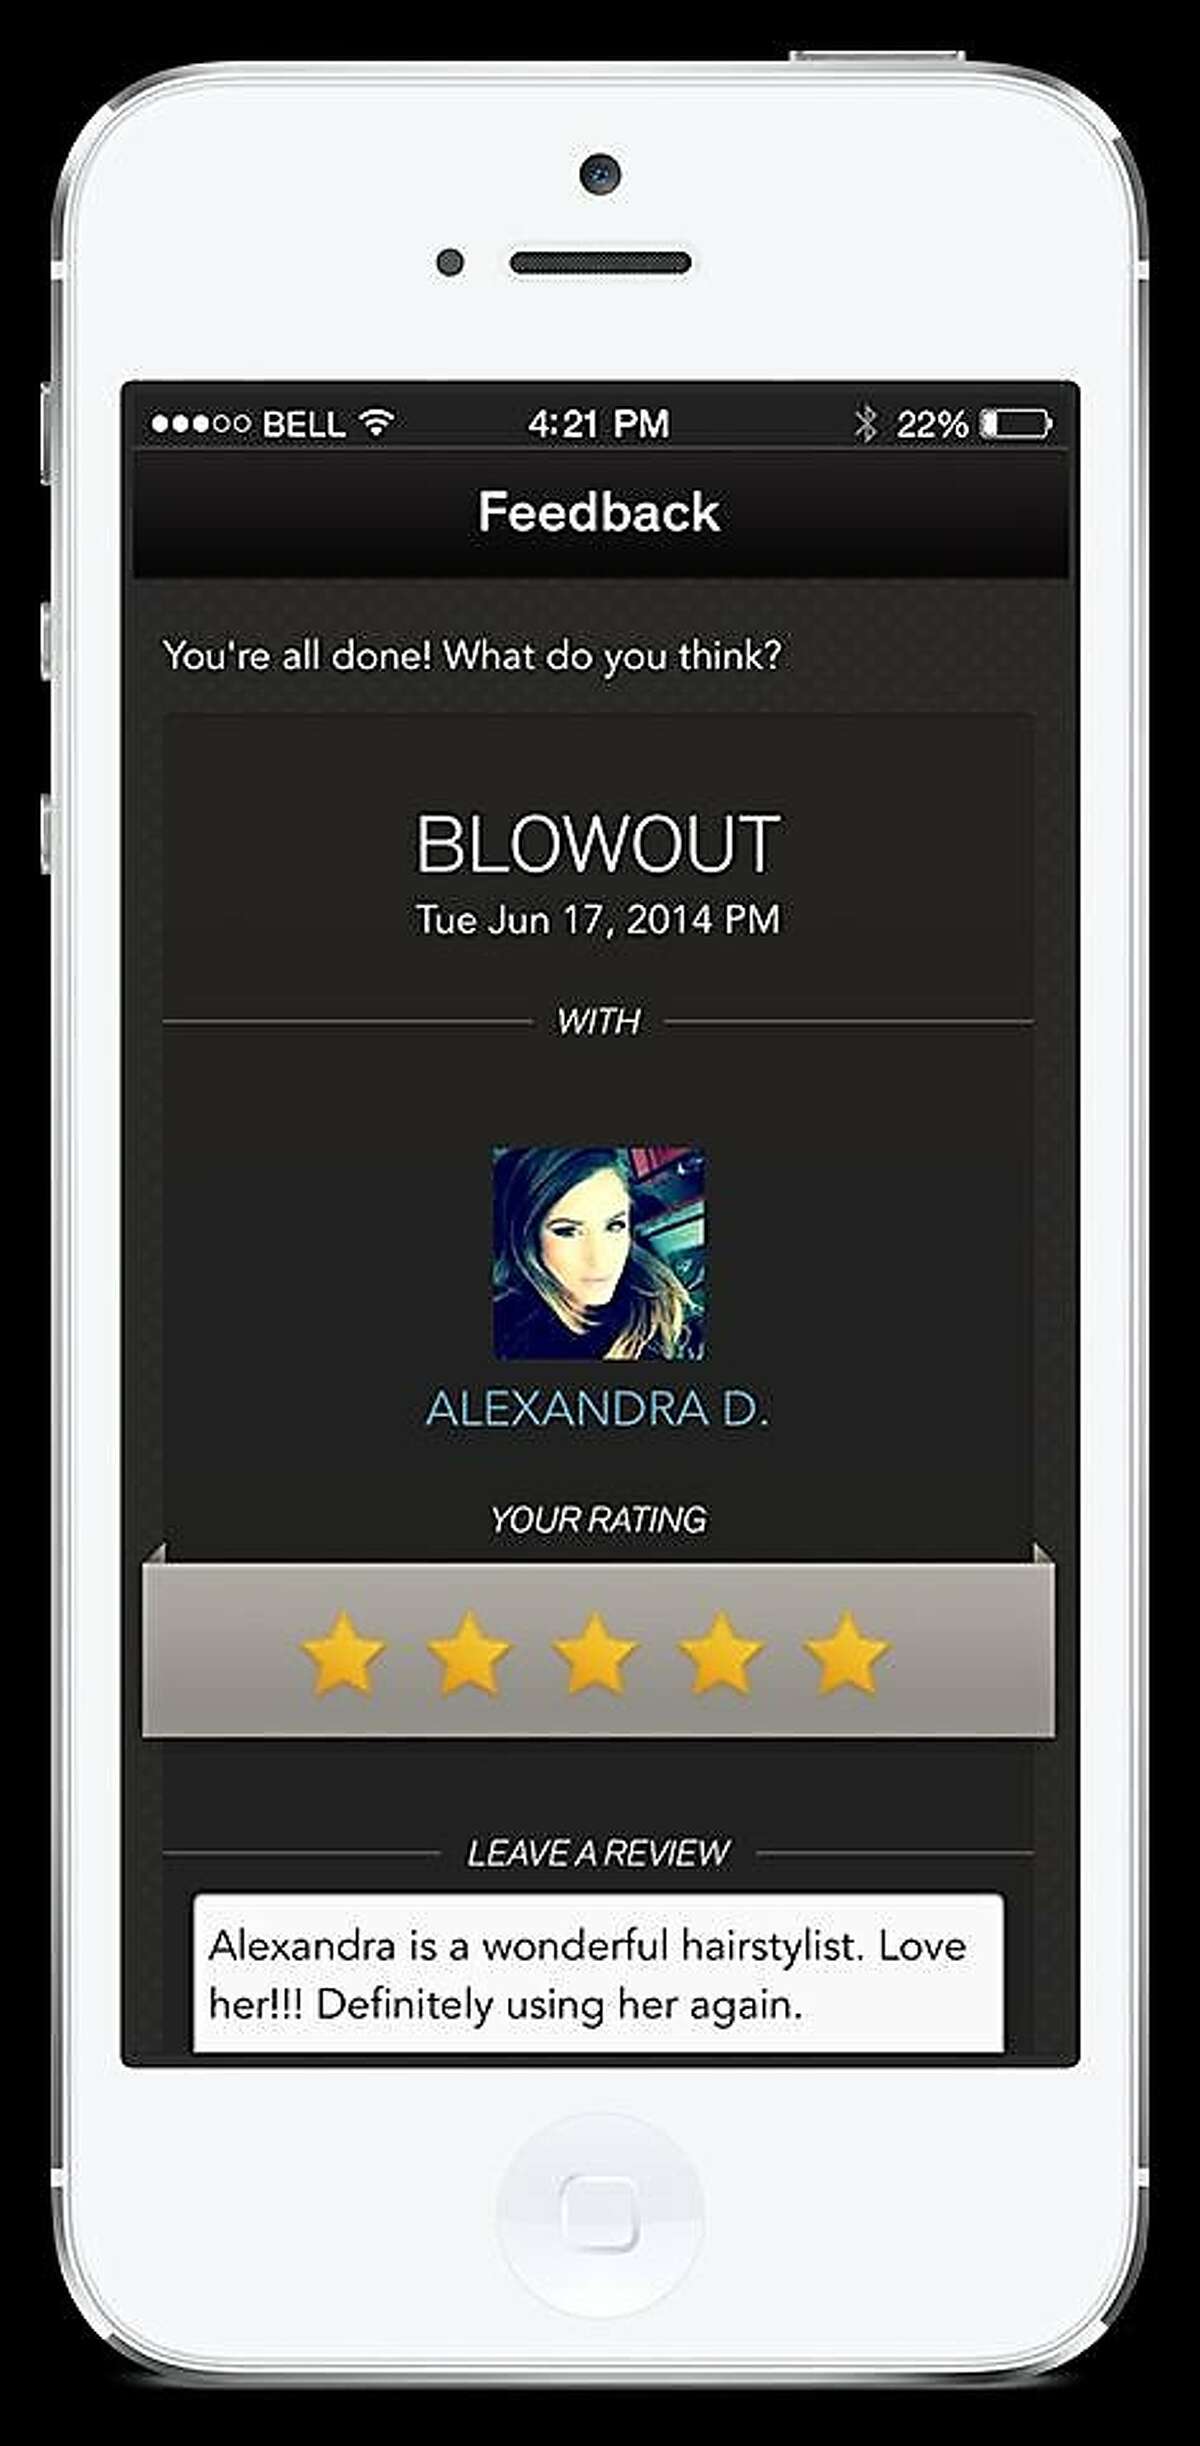 Stylebee, the Uber of grooming, sends a salon to the customer, wherever she might be. Using the free Stylebee app, customers can make appointments within a two-hour window and receive 60-minute services from licensed professionals such as blowouts ($50), updos ($85) and hair and makeup (from $125 to $150). The company, which launched in Los Angeles earlier this year, came to the Bay Area in May and serves San Francisco and the Peninsula/South Bay.